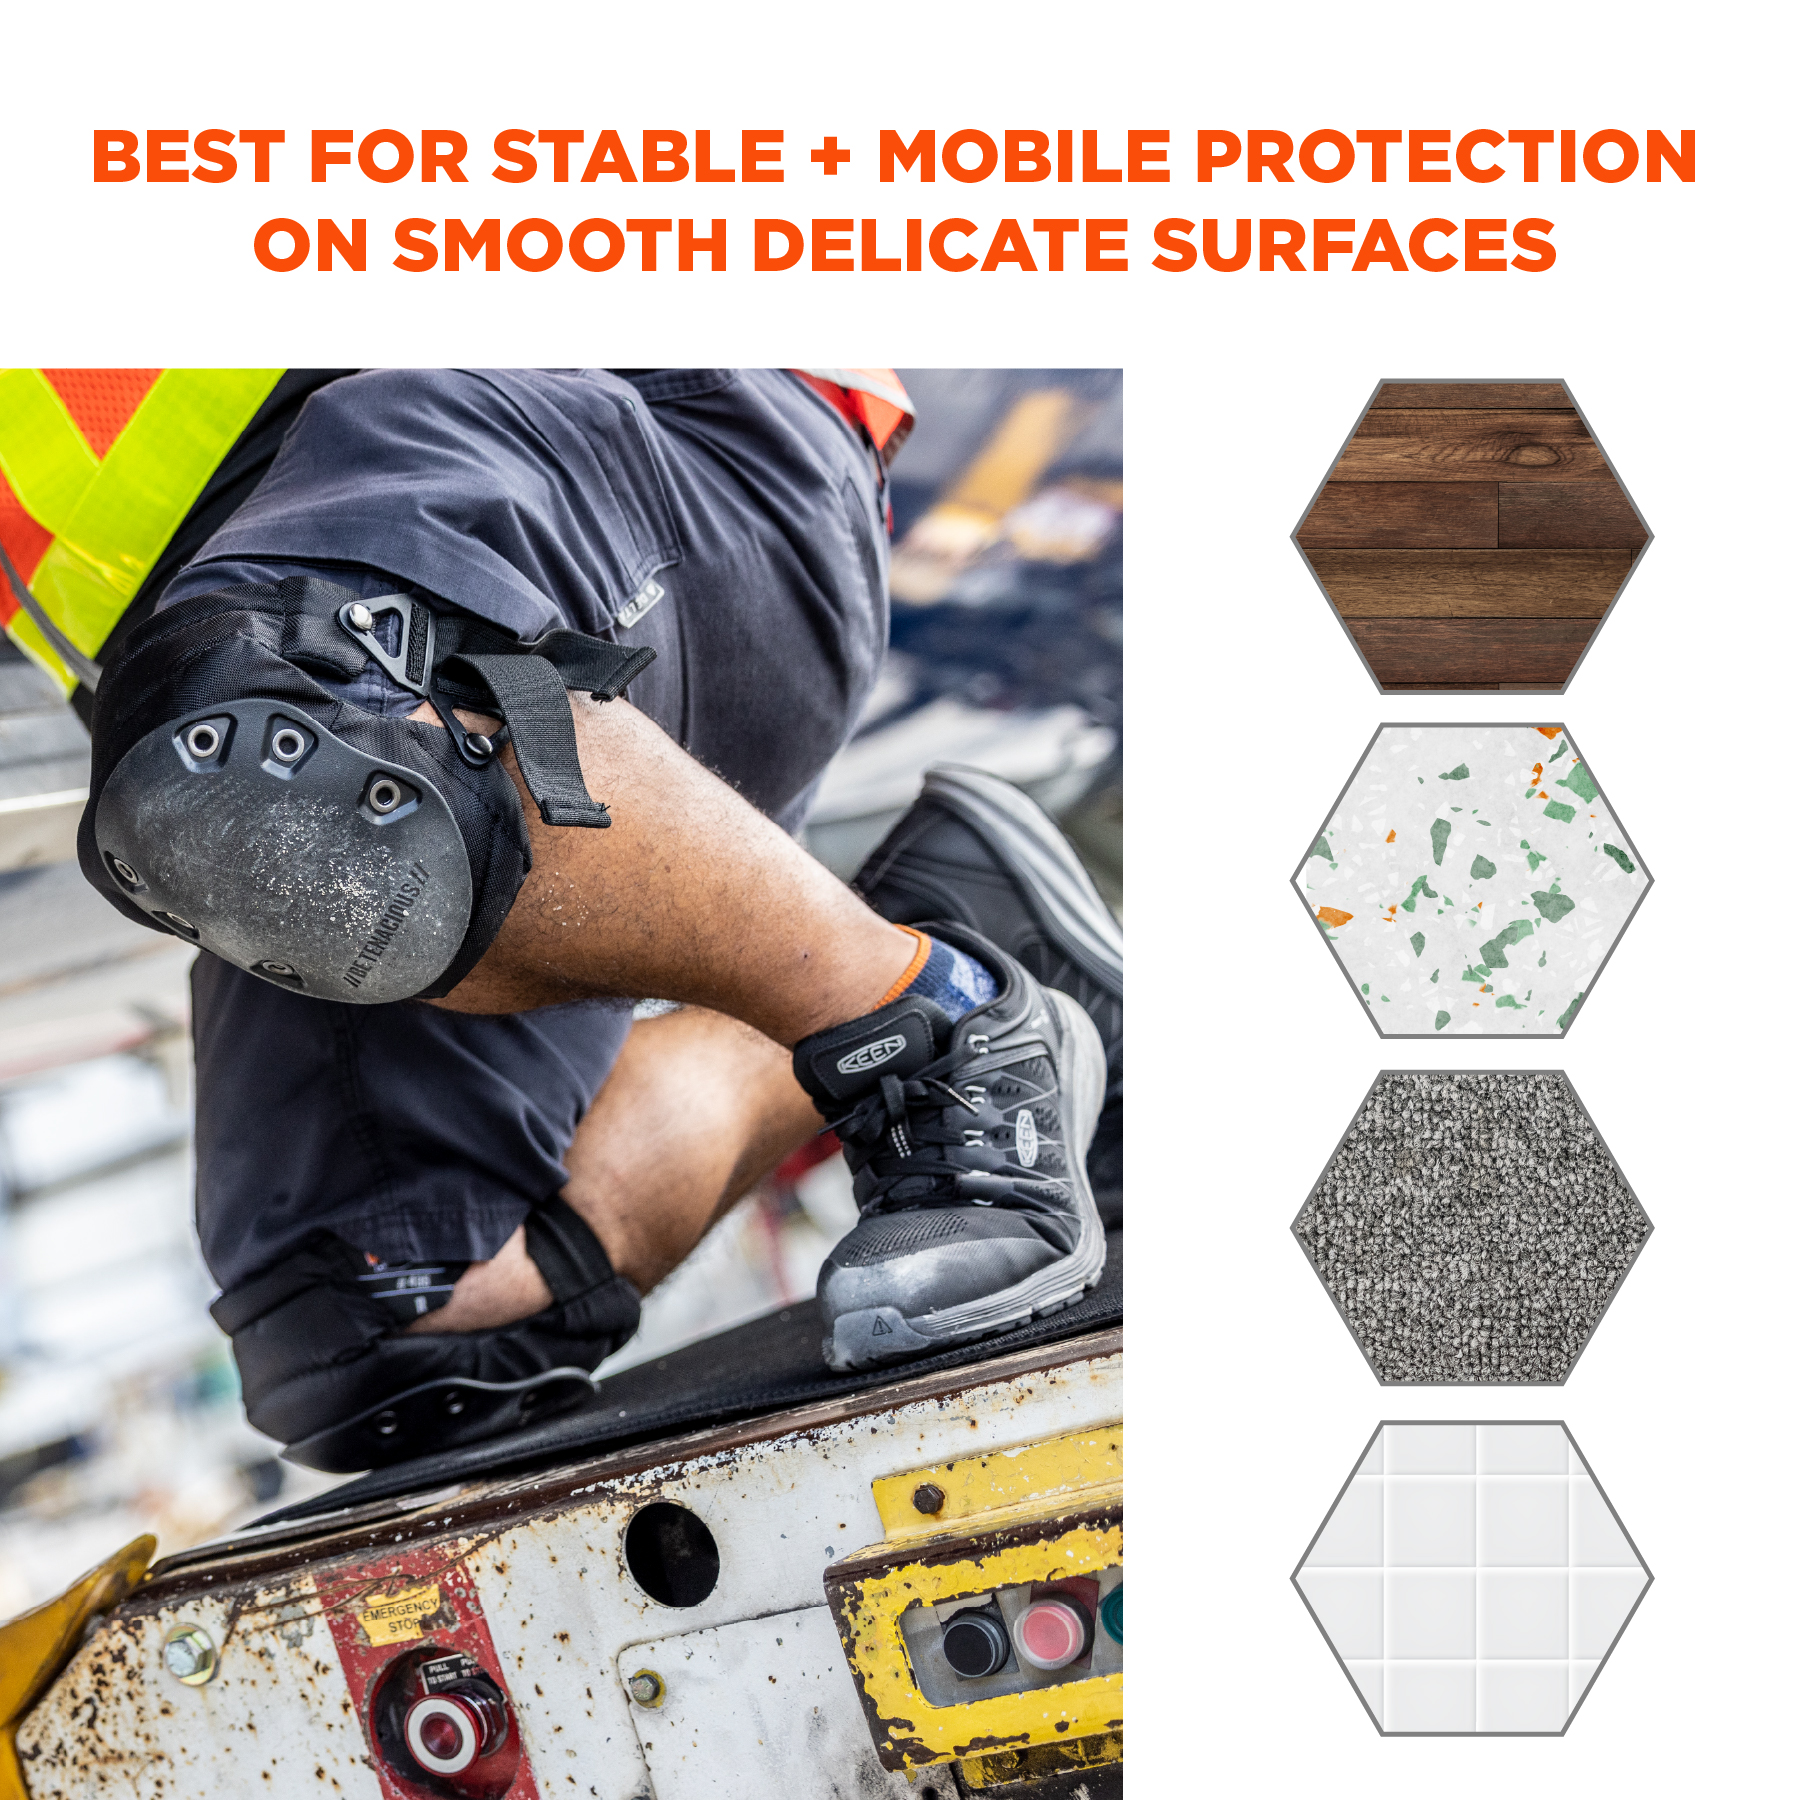 https://www.ergodyne.com/sites/default/files/product-images/18435-435-comfort-hinge-gel-knee-pads-black-best-for-stable-and-mobile-protection-on-smooth-delicate-surfaces.jpg